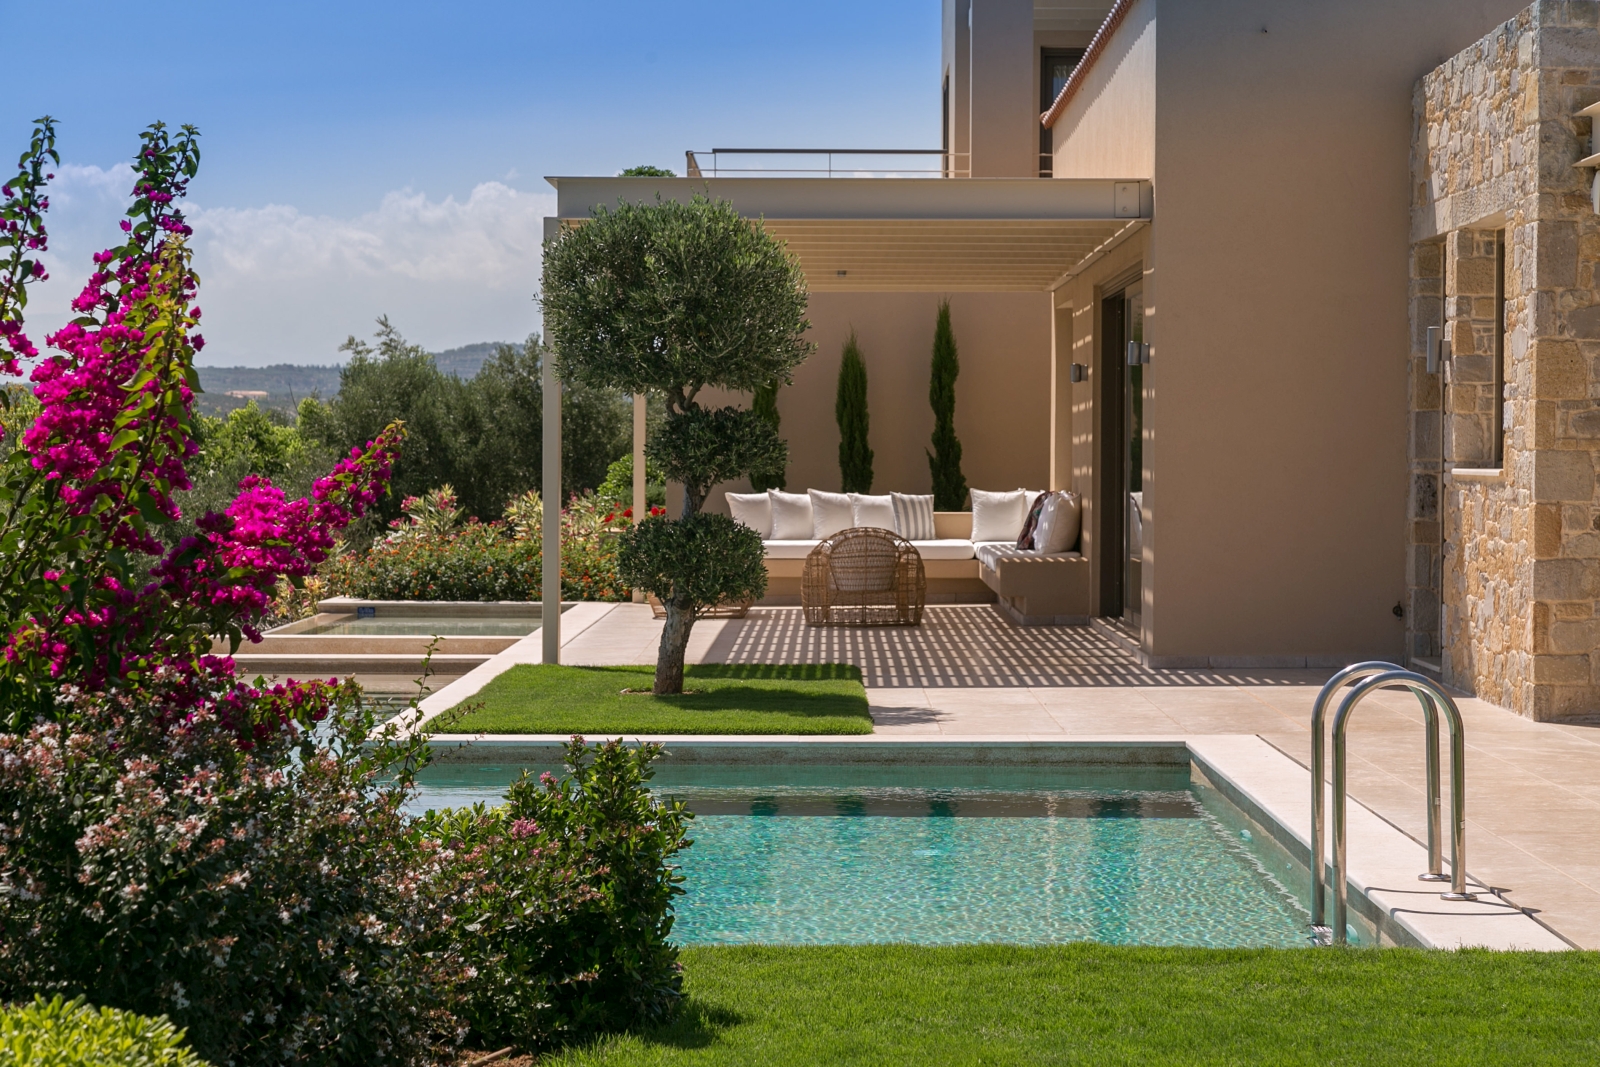 View of pool and outdoor lounge area with comfy chairs and sofa and flowers in foreground at Villa Ianira on Crete, Greece